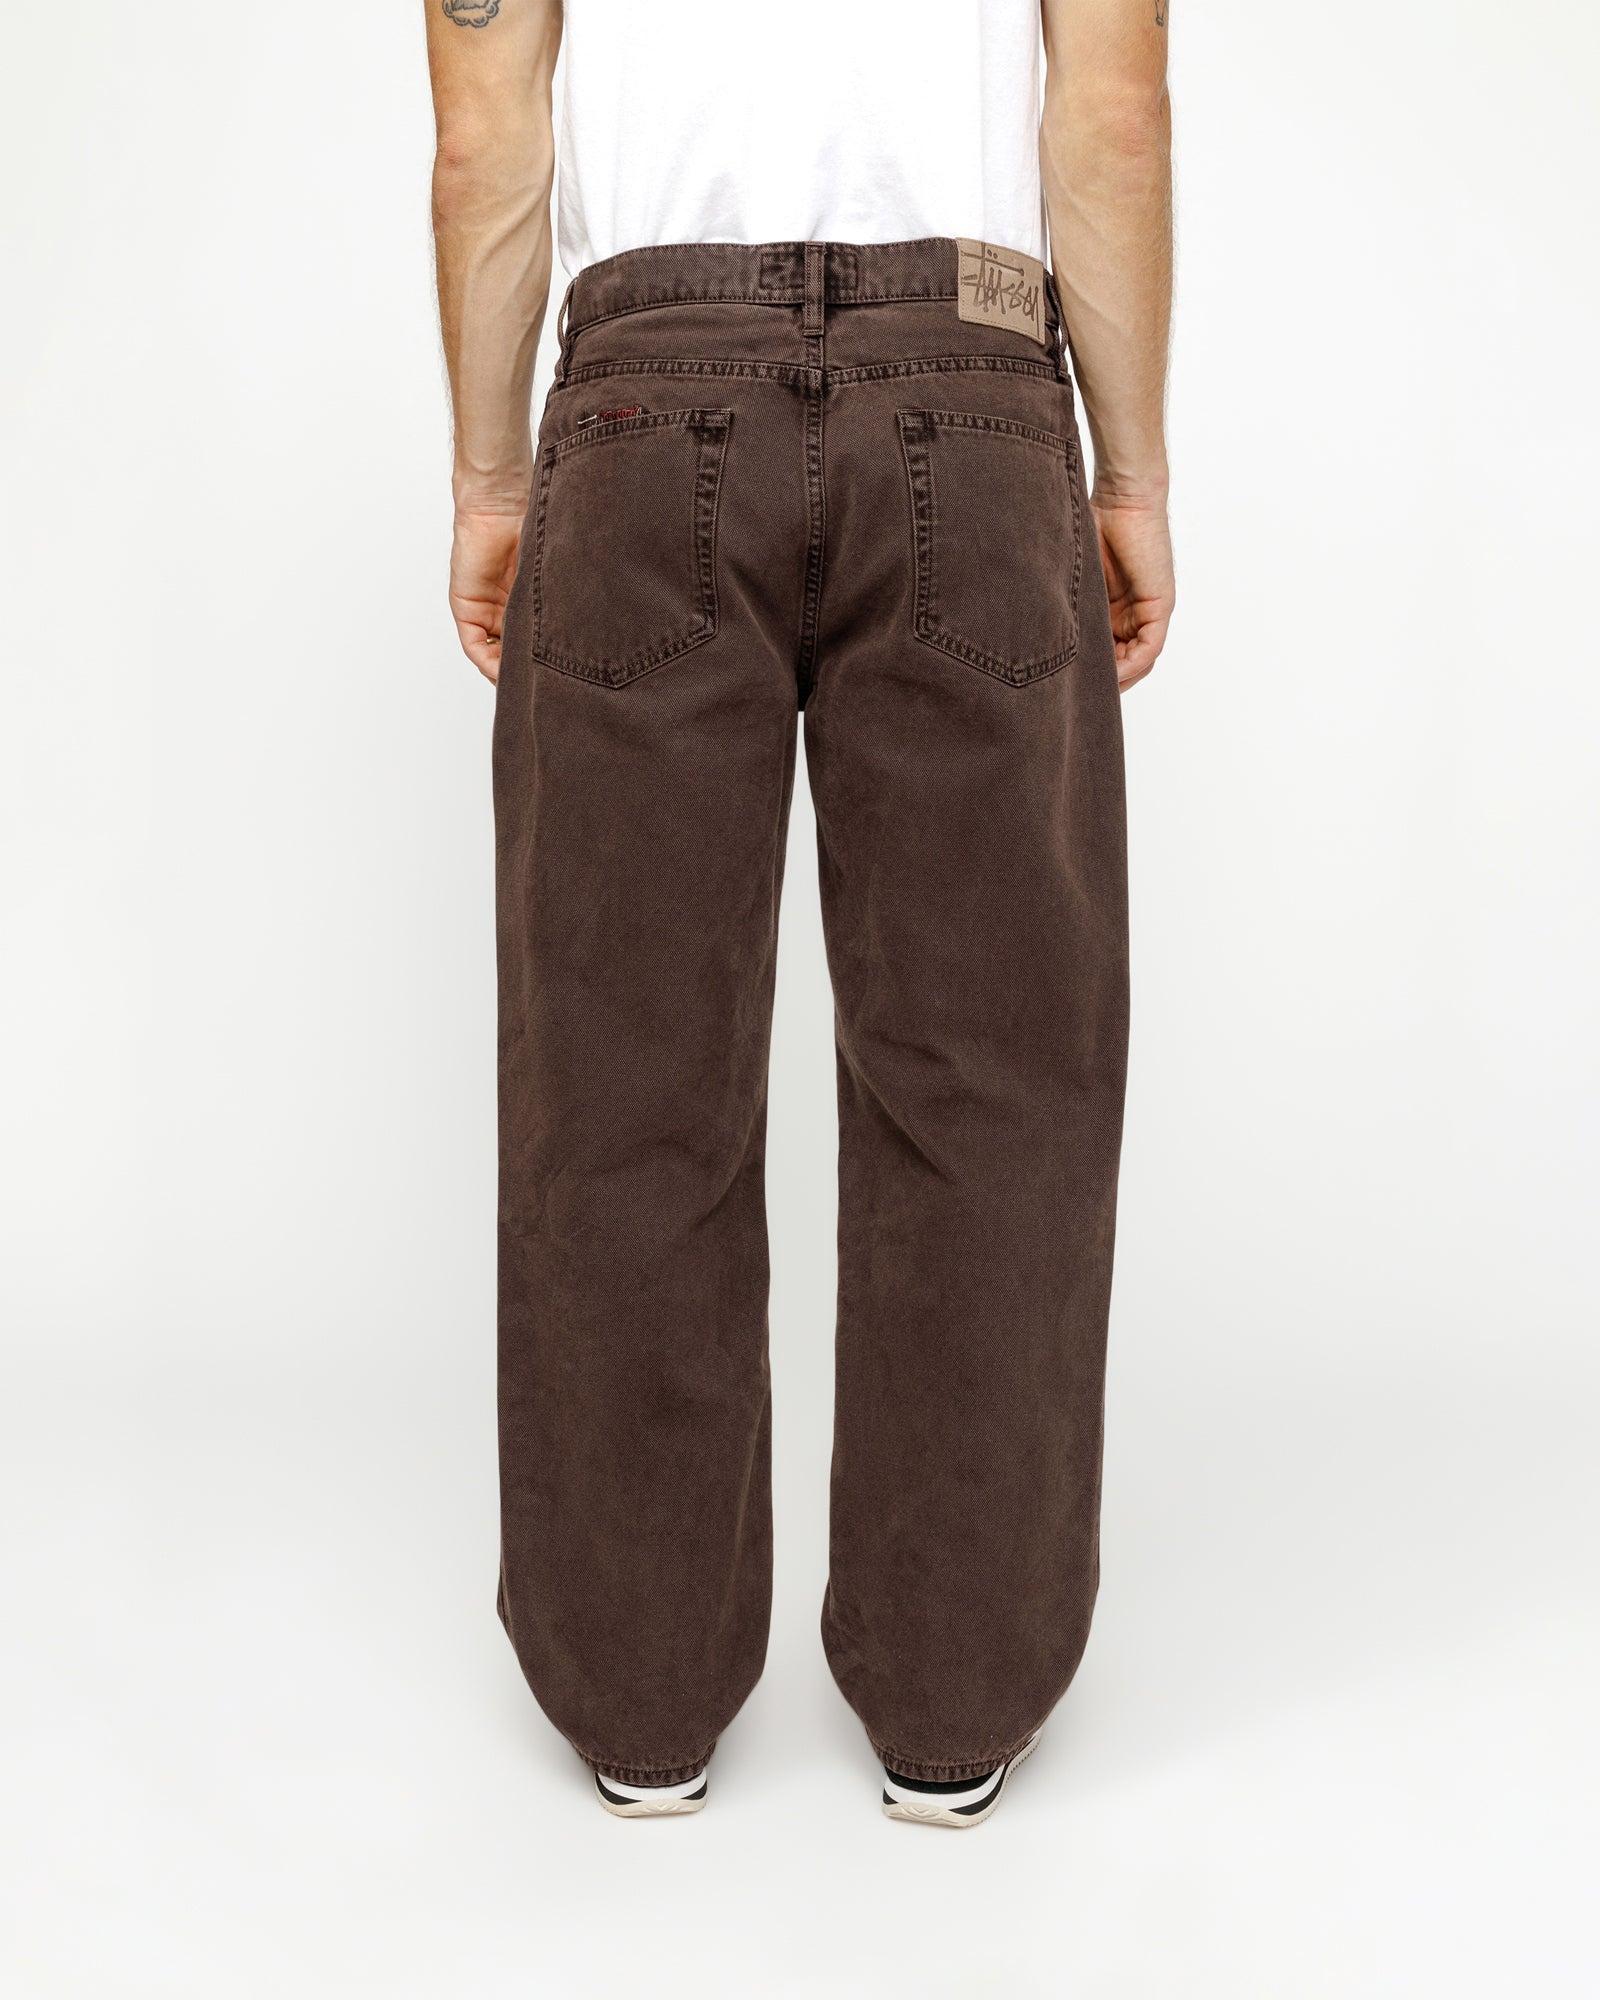 CLASSIC JEAN WASHED CANVAS BROWN BOTTOMS